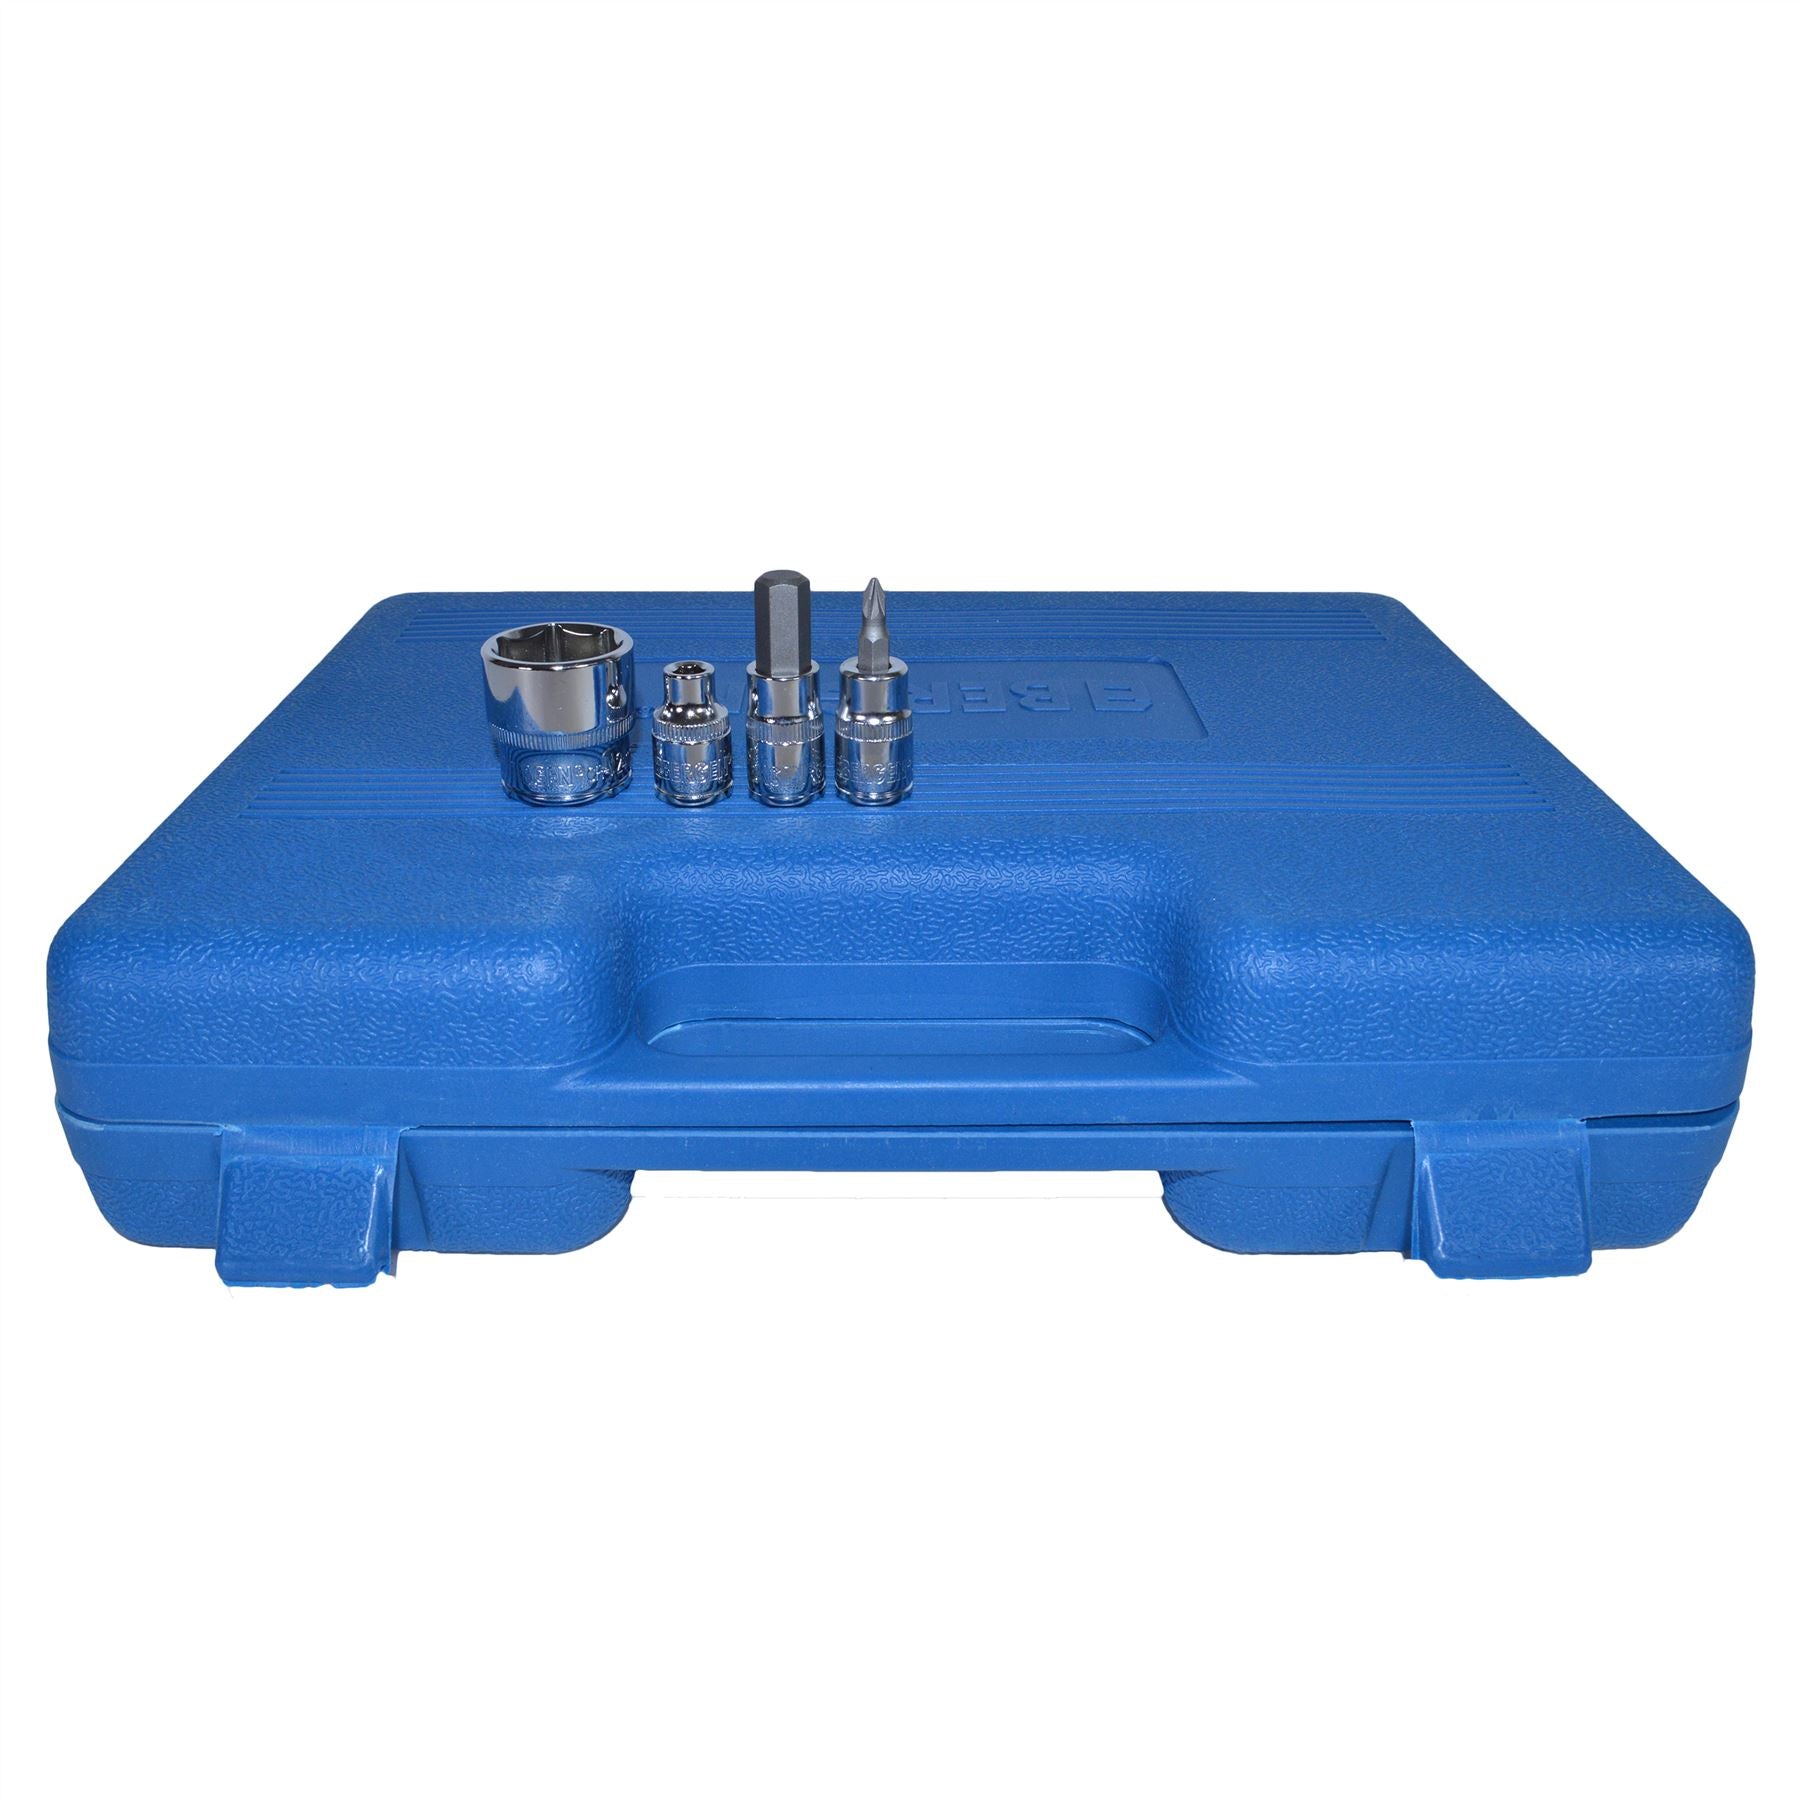 3/8" Drive Metric Shallow And Deep Socket And Accessory Kit 61pc Set